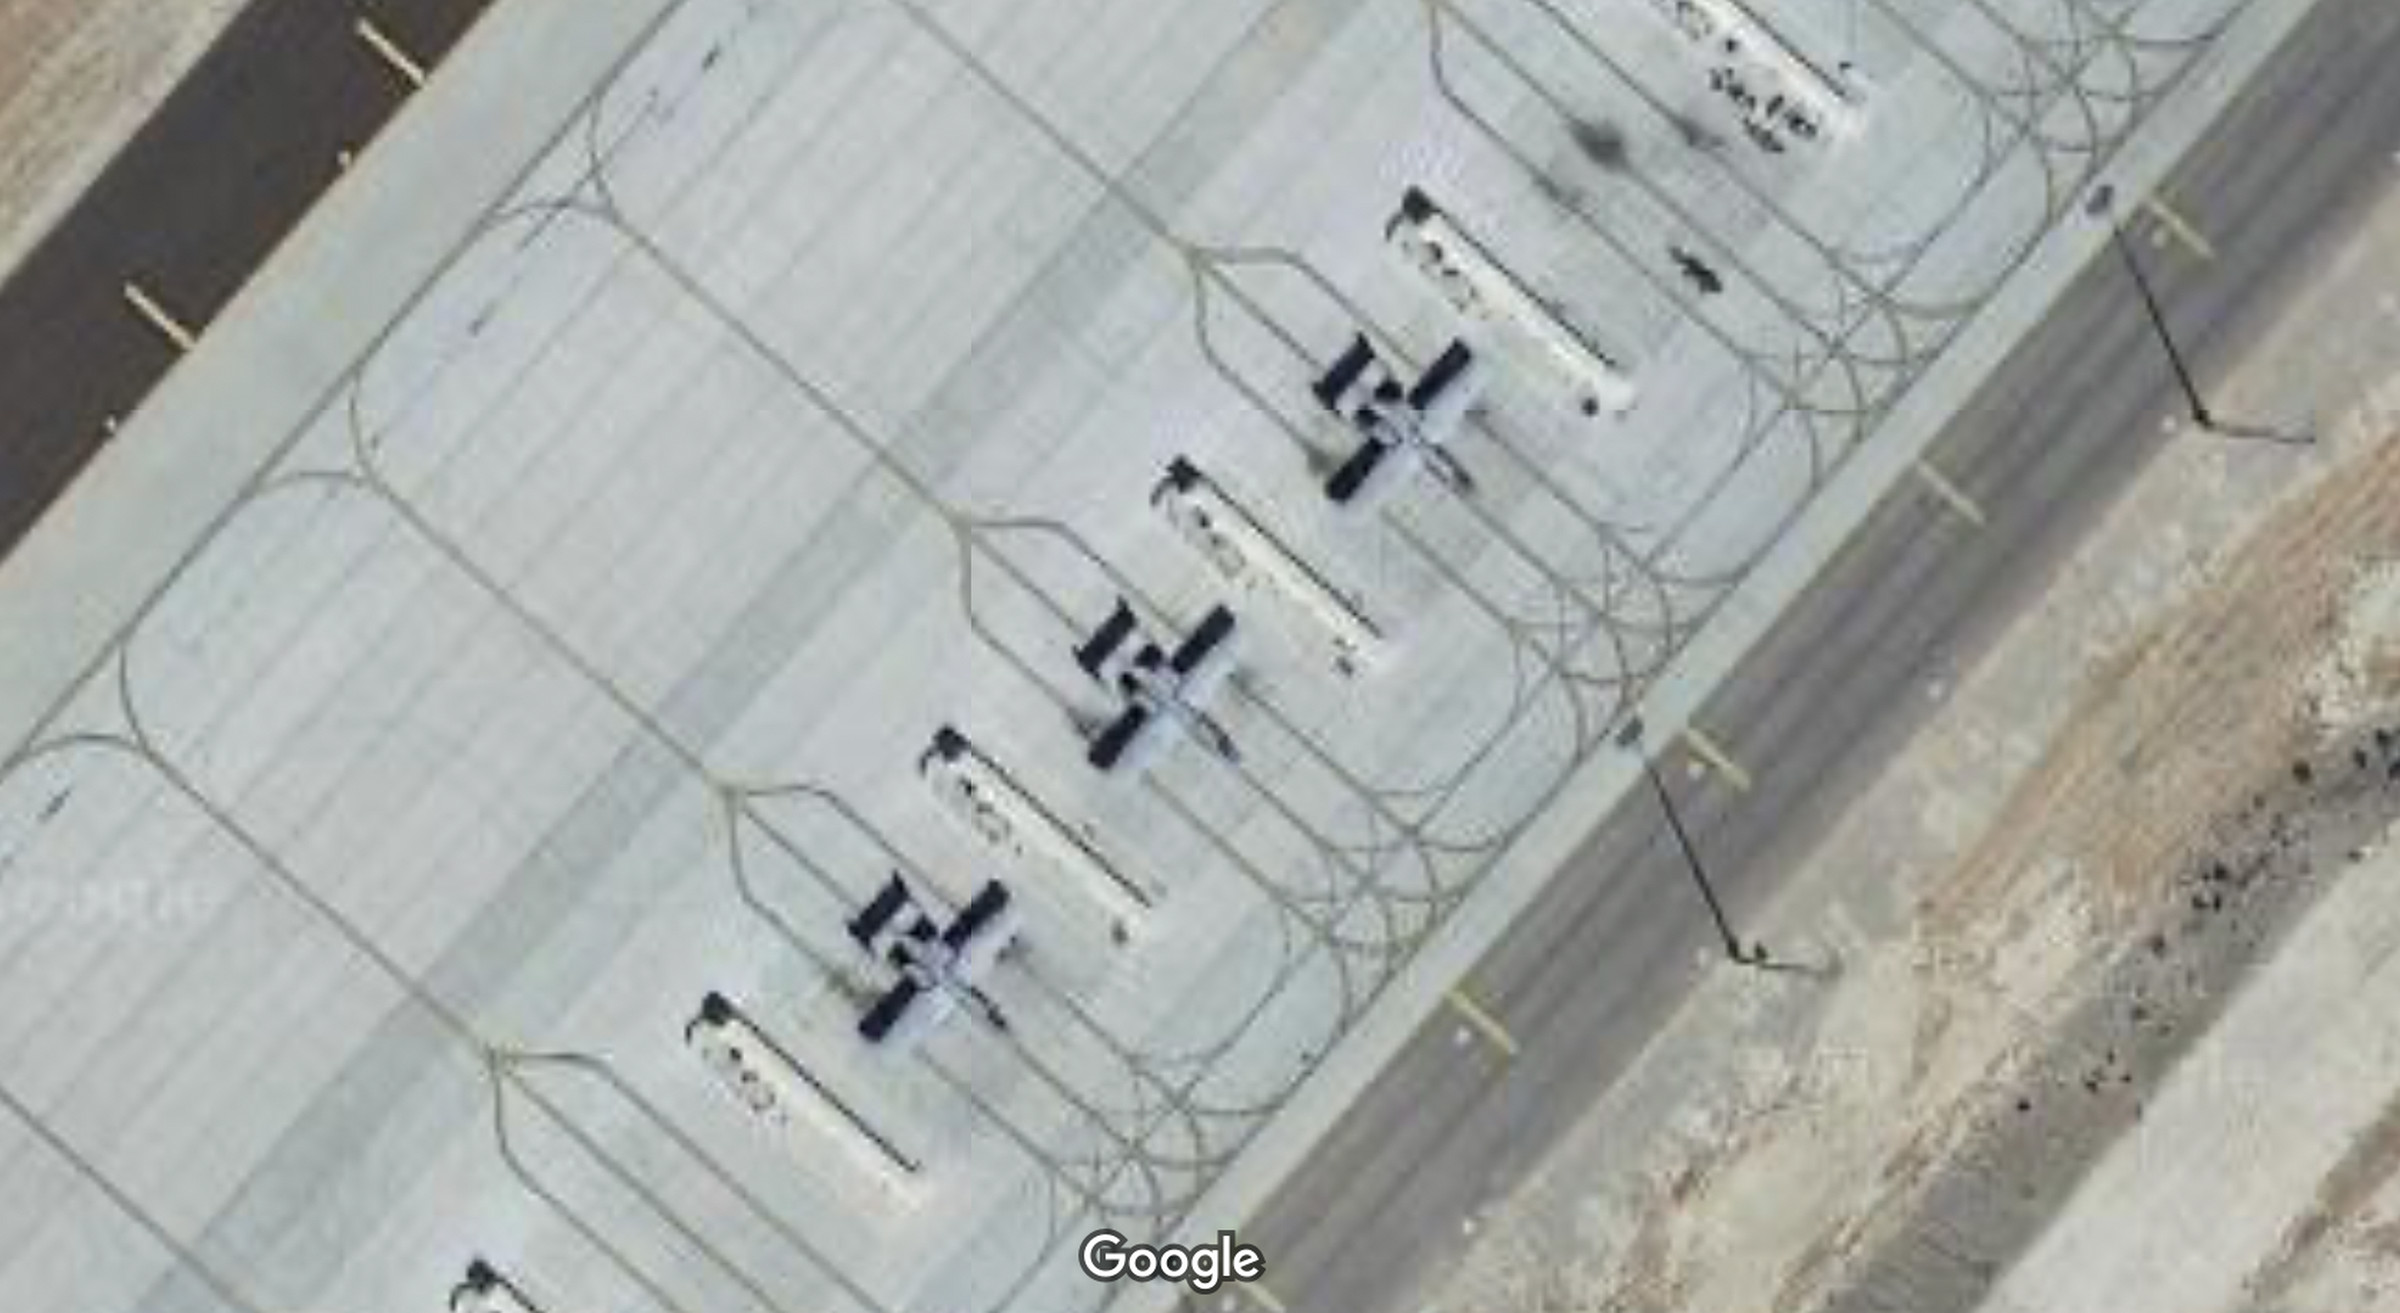 Images of planes from Google Maps at Nellis Air Force Base in Nevada.